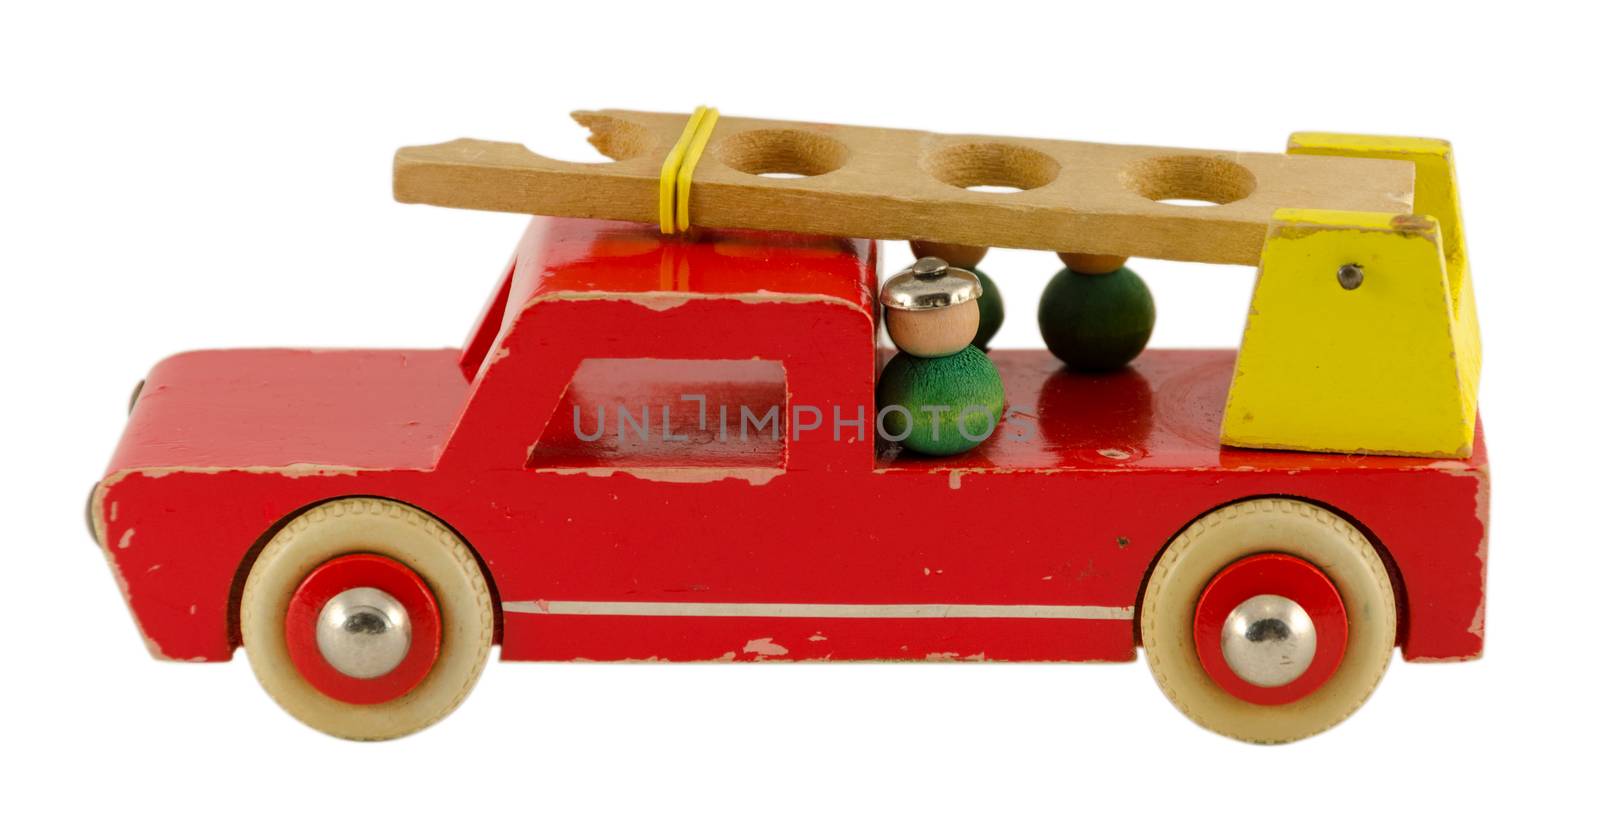 antique wooden fire-engine toy isoalted on white by sauletas